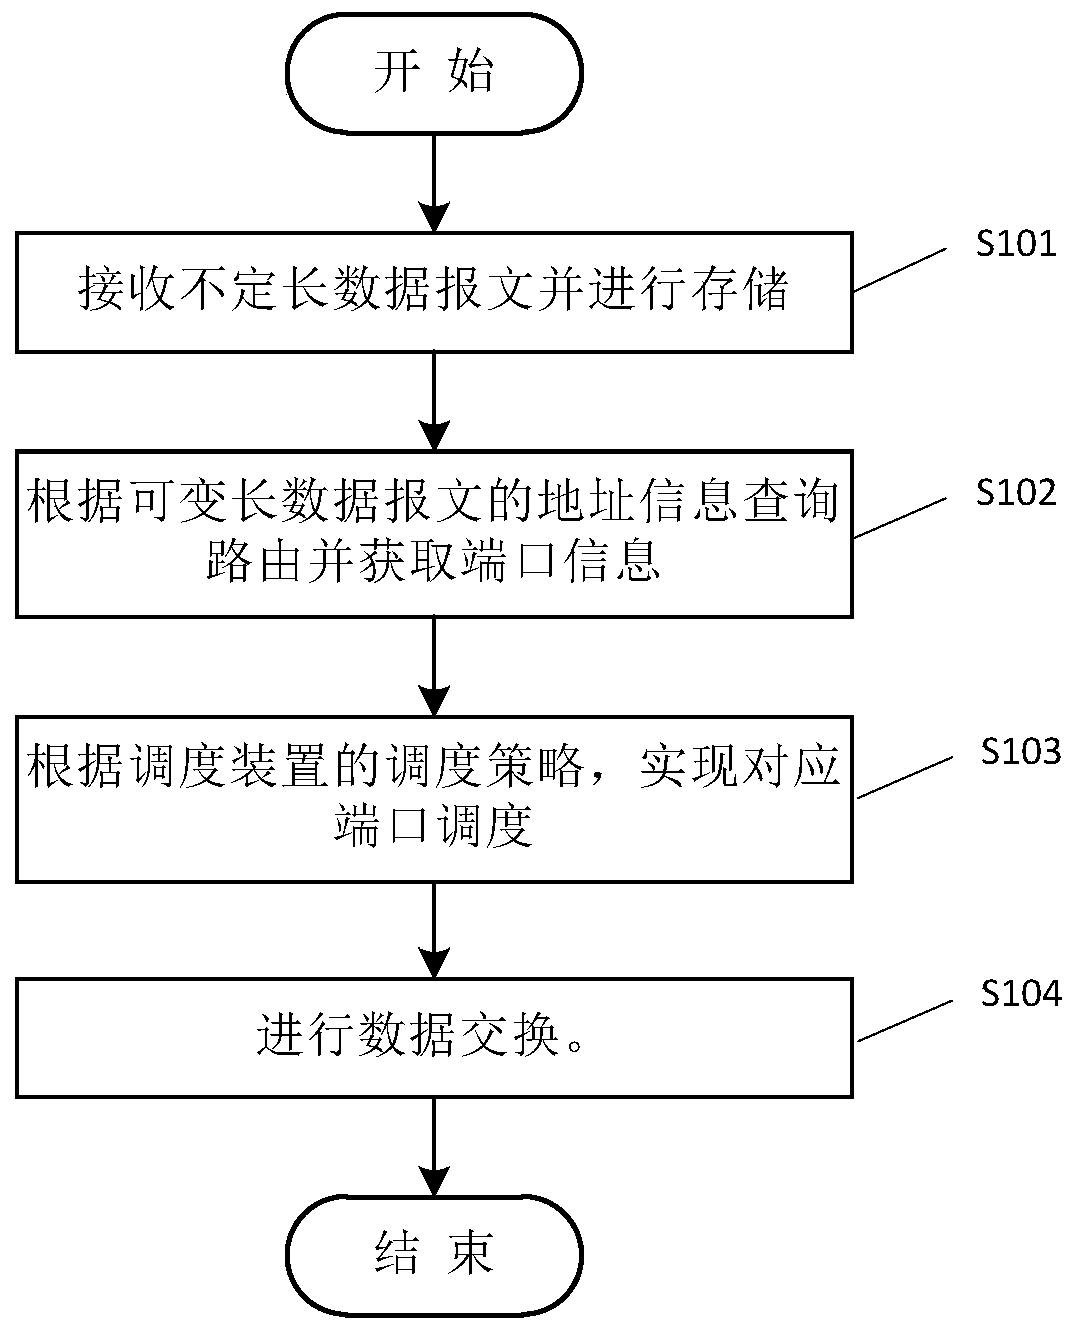 Variable-length message data processing method and scheduling device